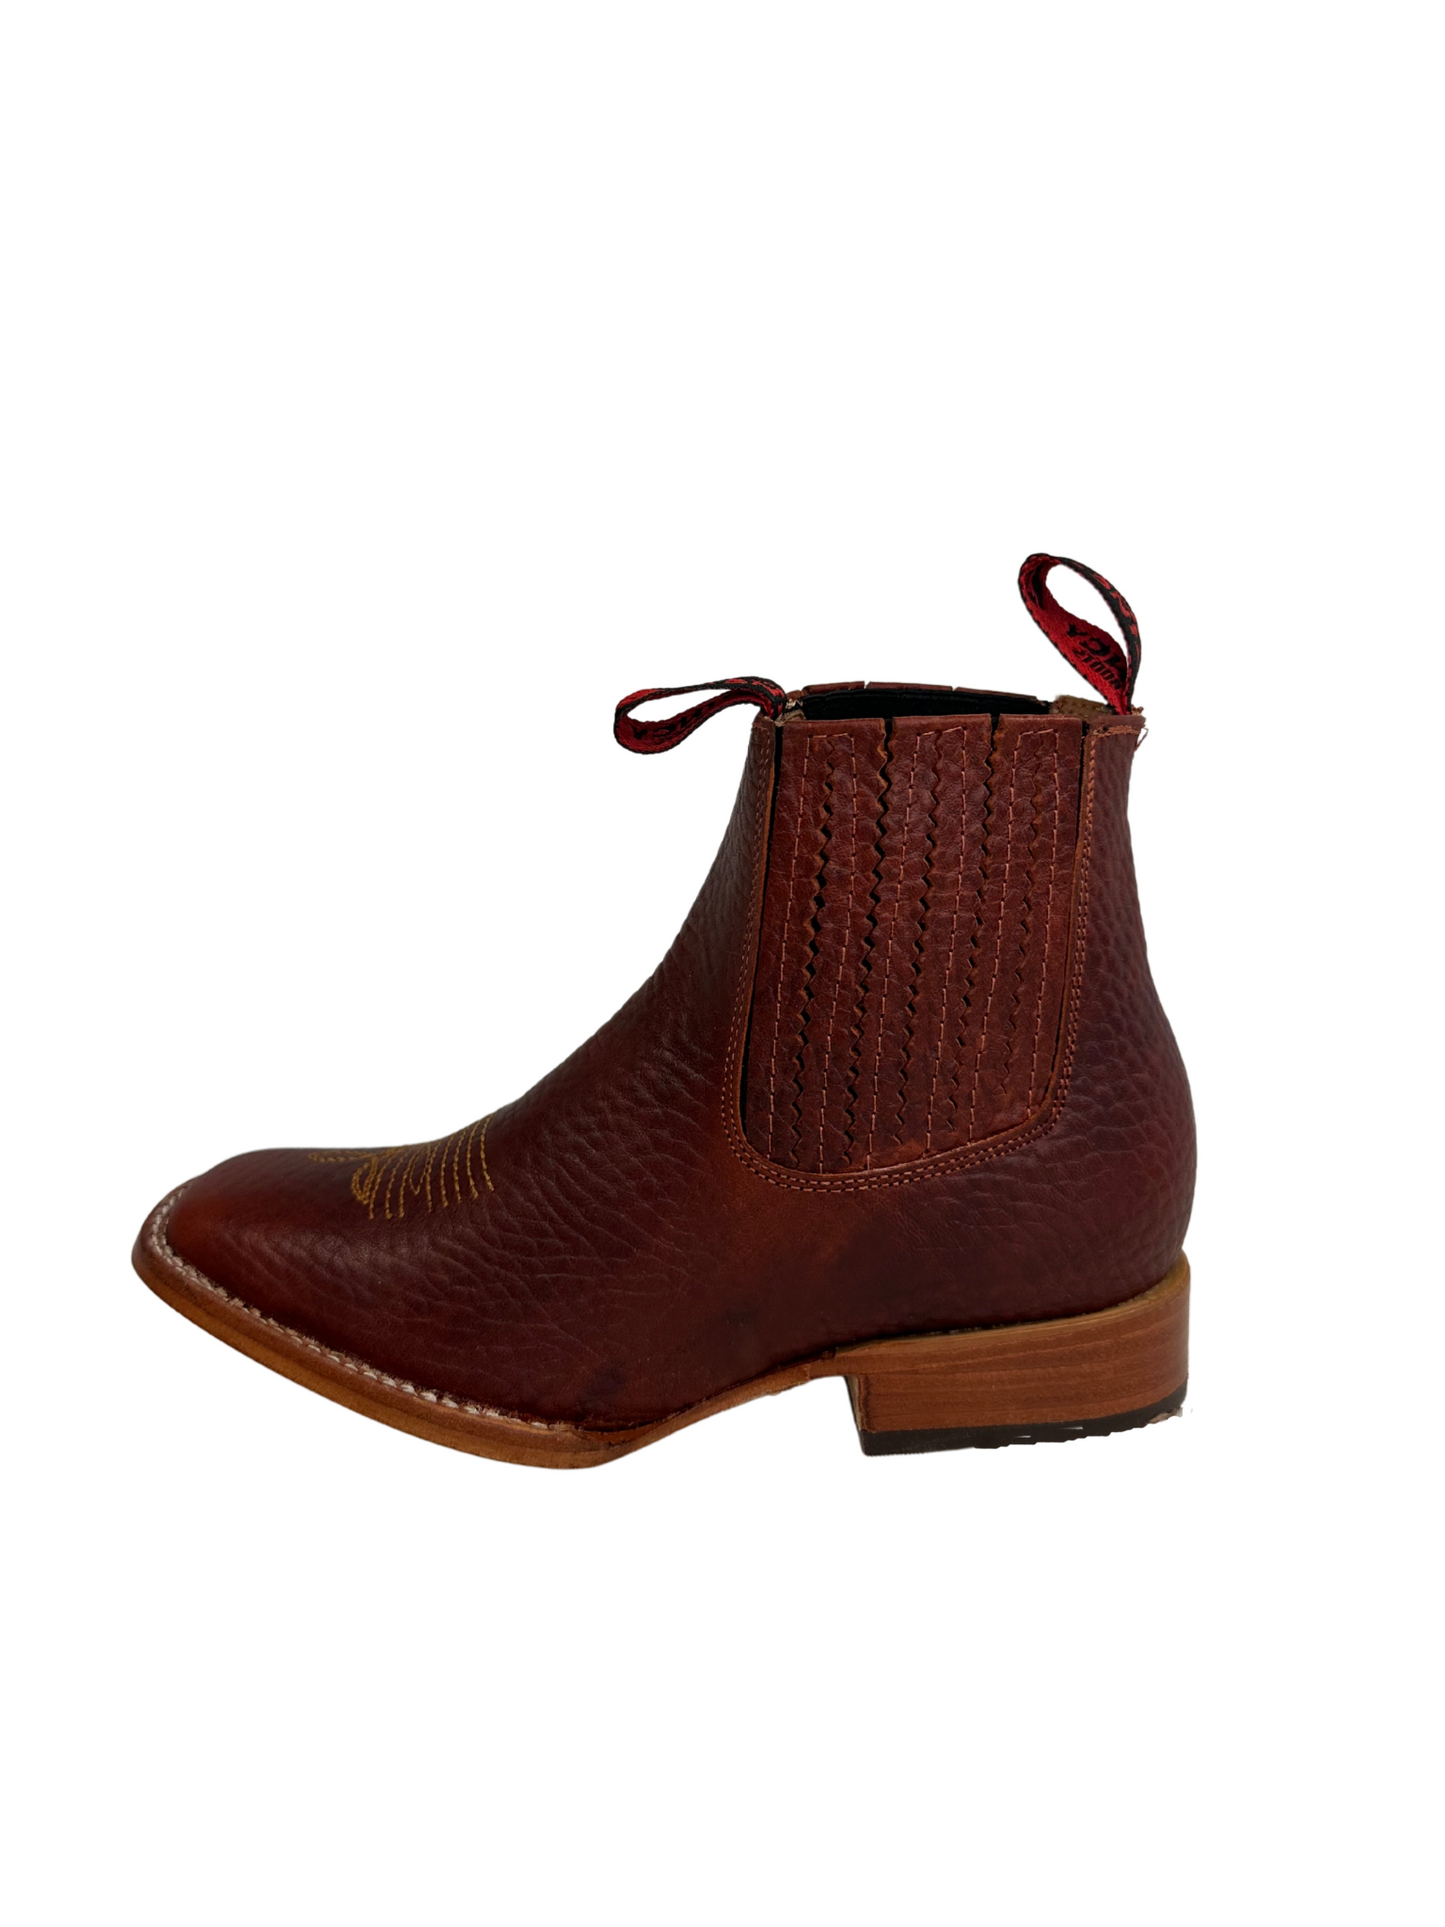 Quincy Kid's Brick Leather Short Boot